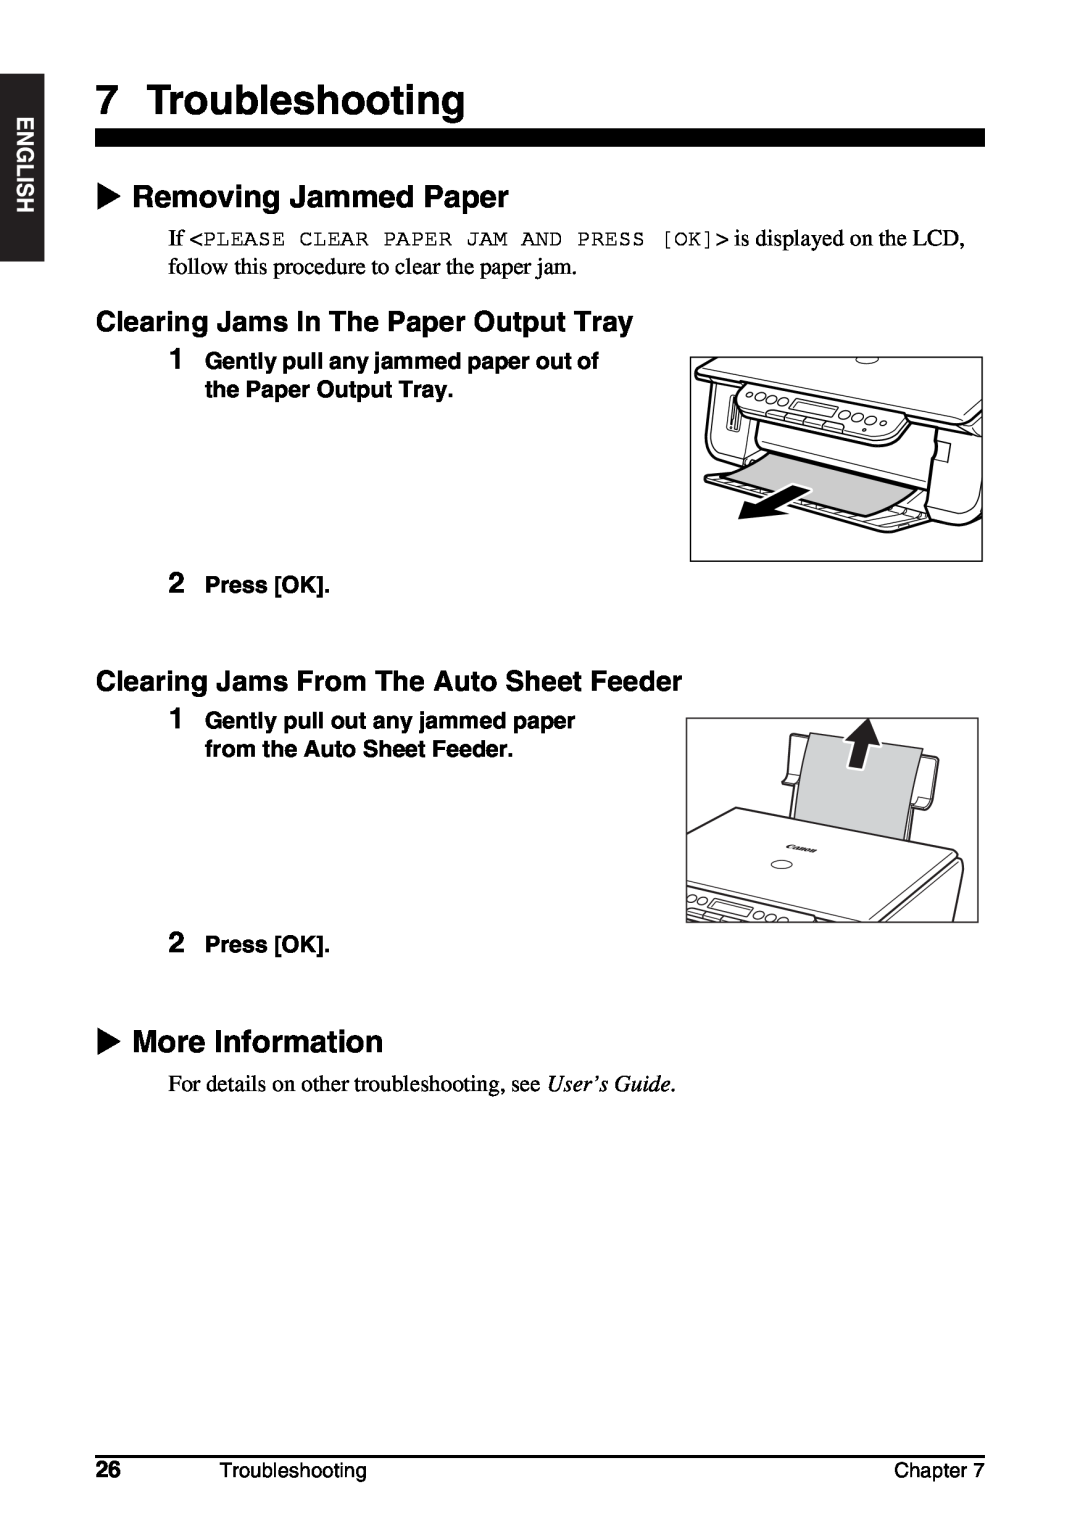 Canon MP130 Troubleshooting, X Removing Jammed Paper, X More Information, Clearing Jams In The Paper Output Tray, Chapter 